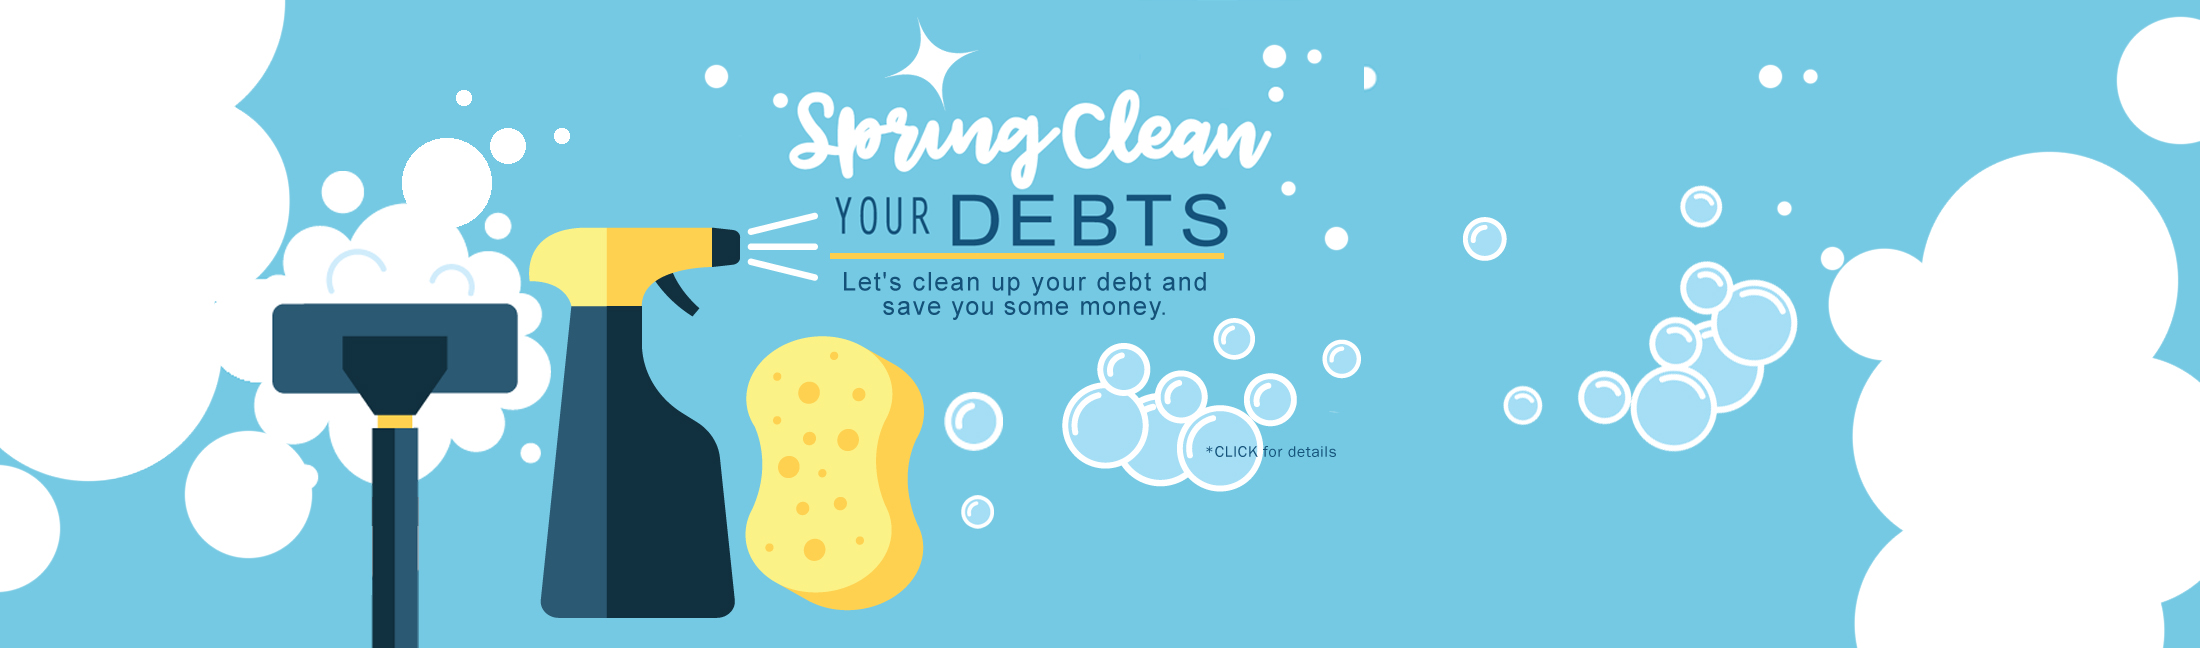 Spring Clean Your Debt